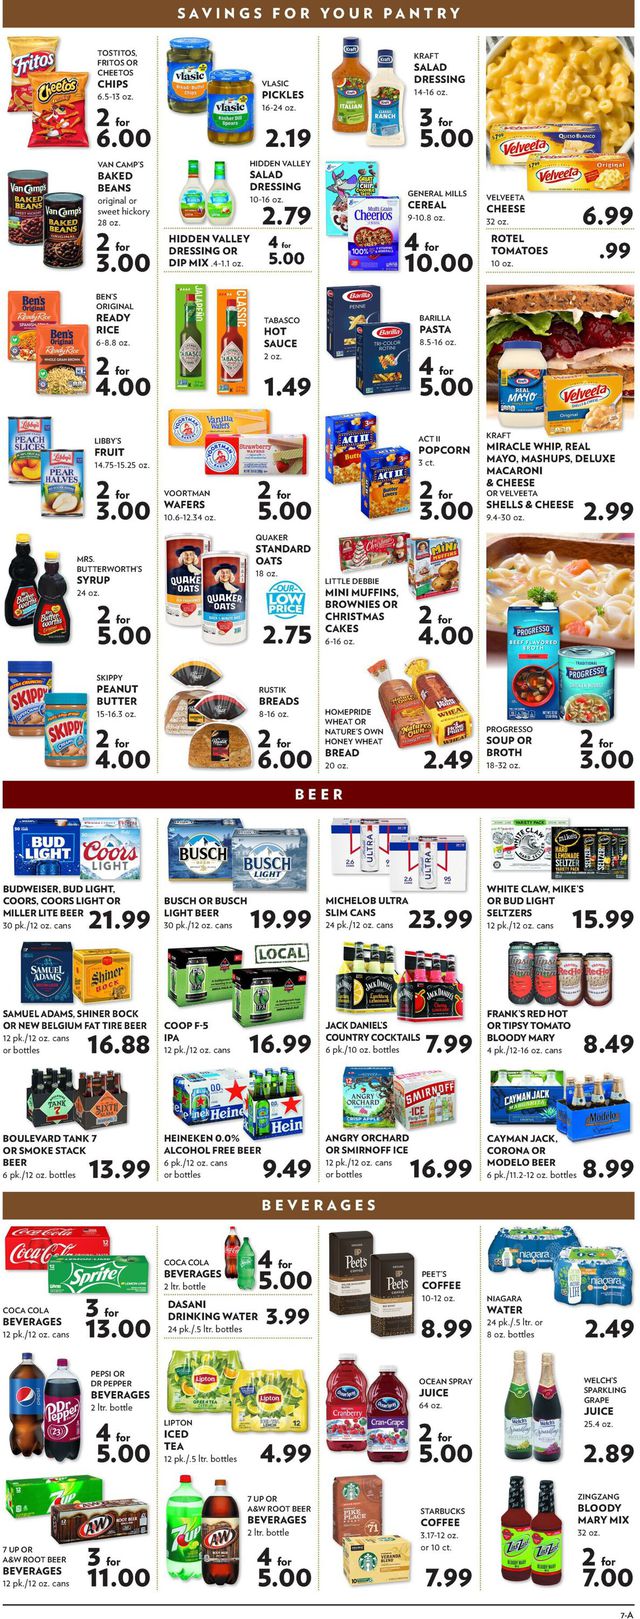 Reasor's Ad from 11/17/2021